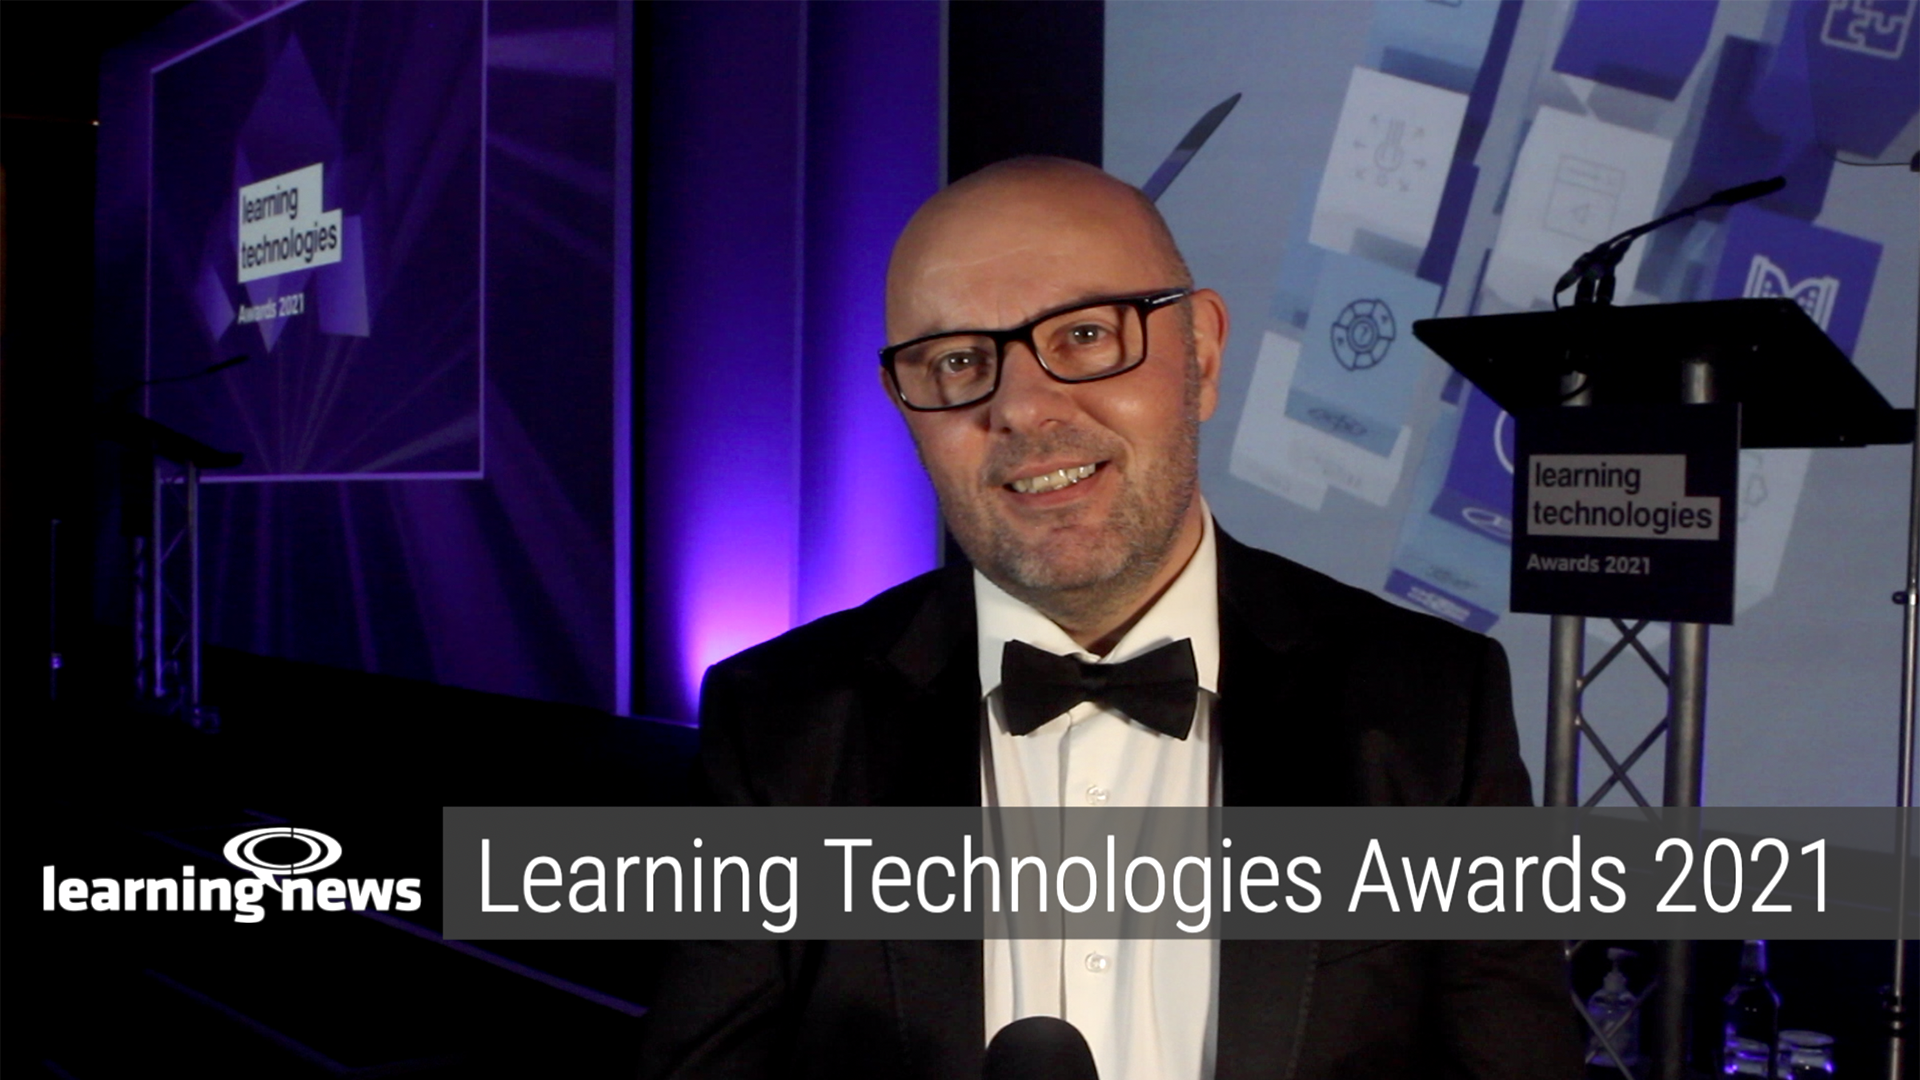 Learning News meets the winners at the Learning Technologies Awards 2021